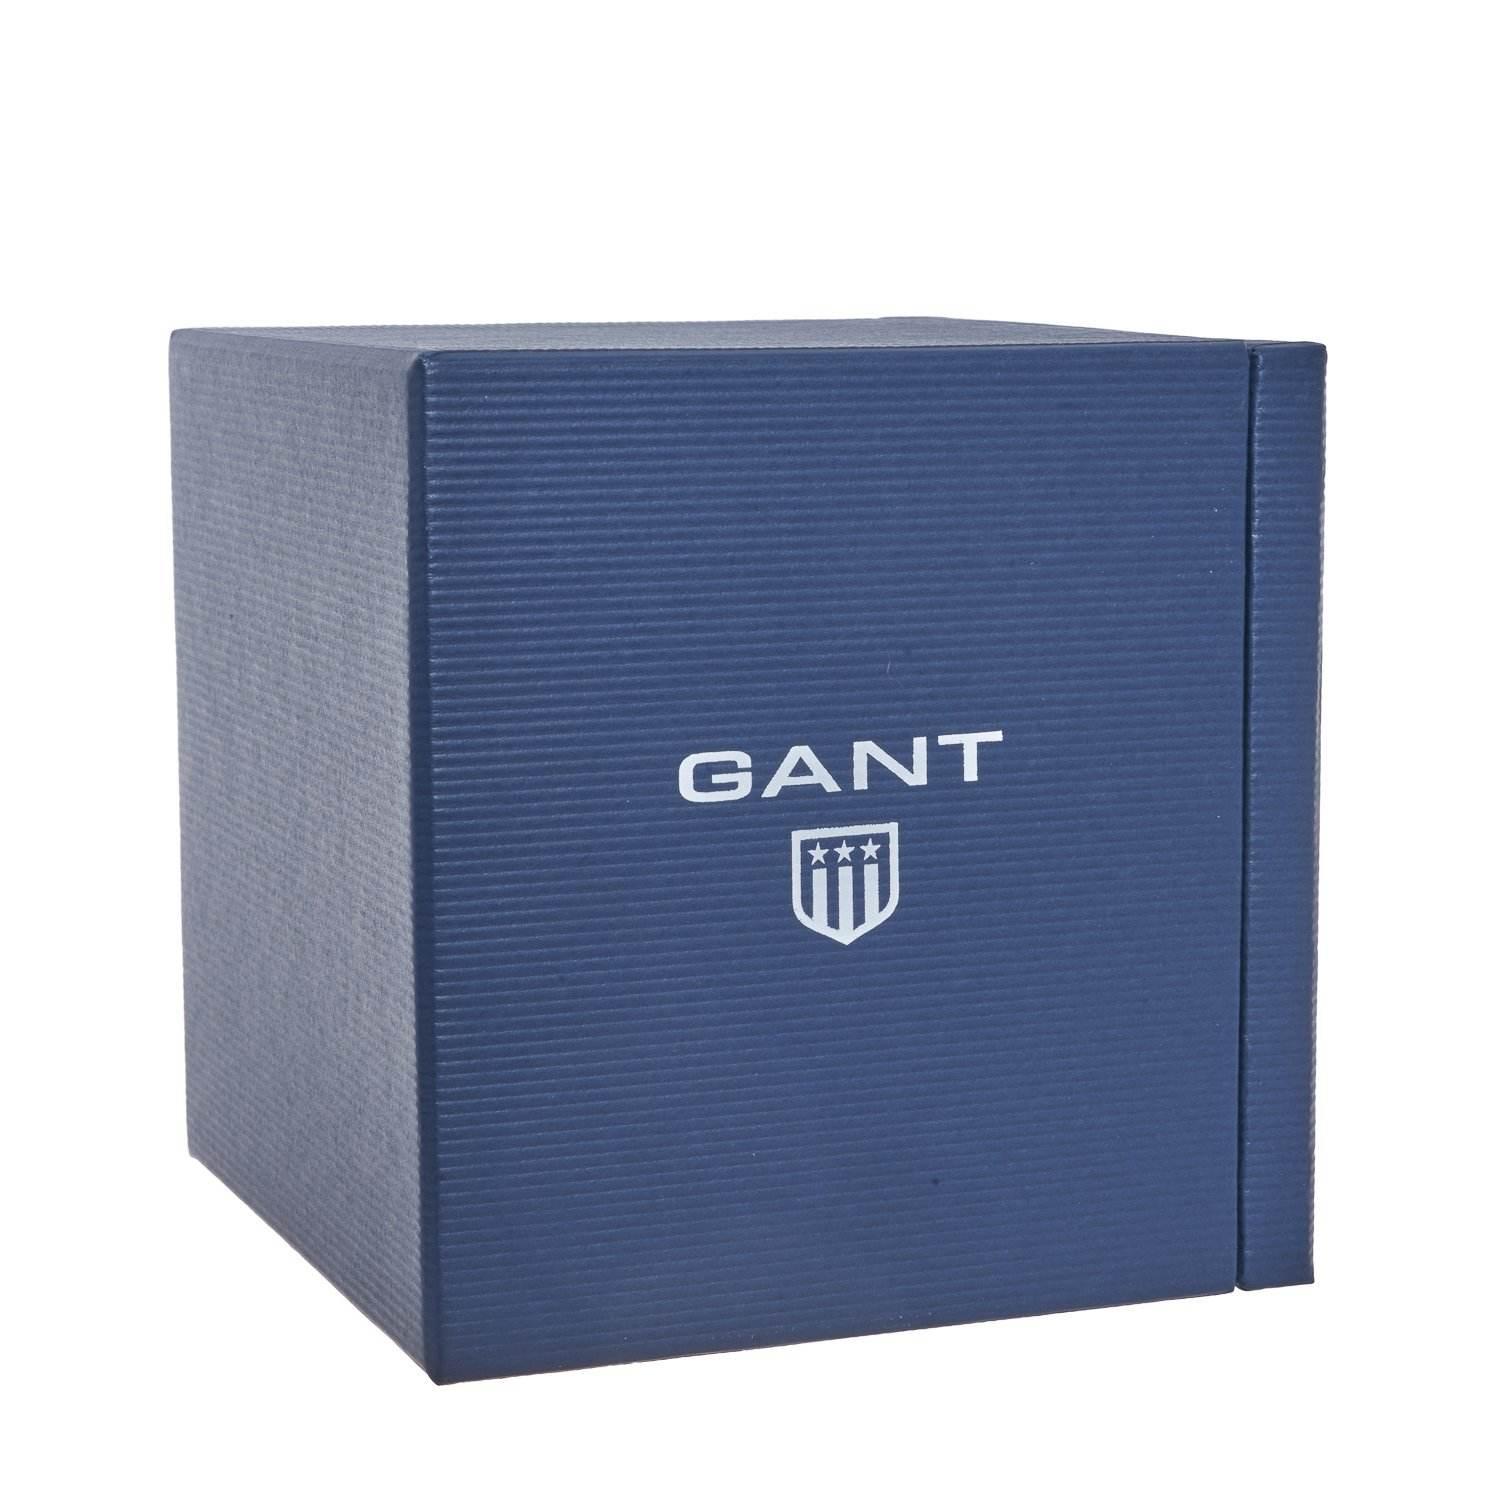 GANT Leather Rose Gold Watch - Save 3% - Lyst